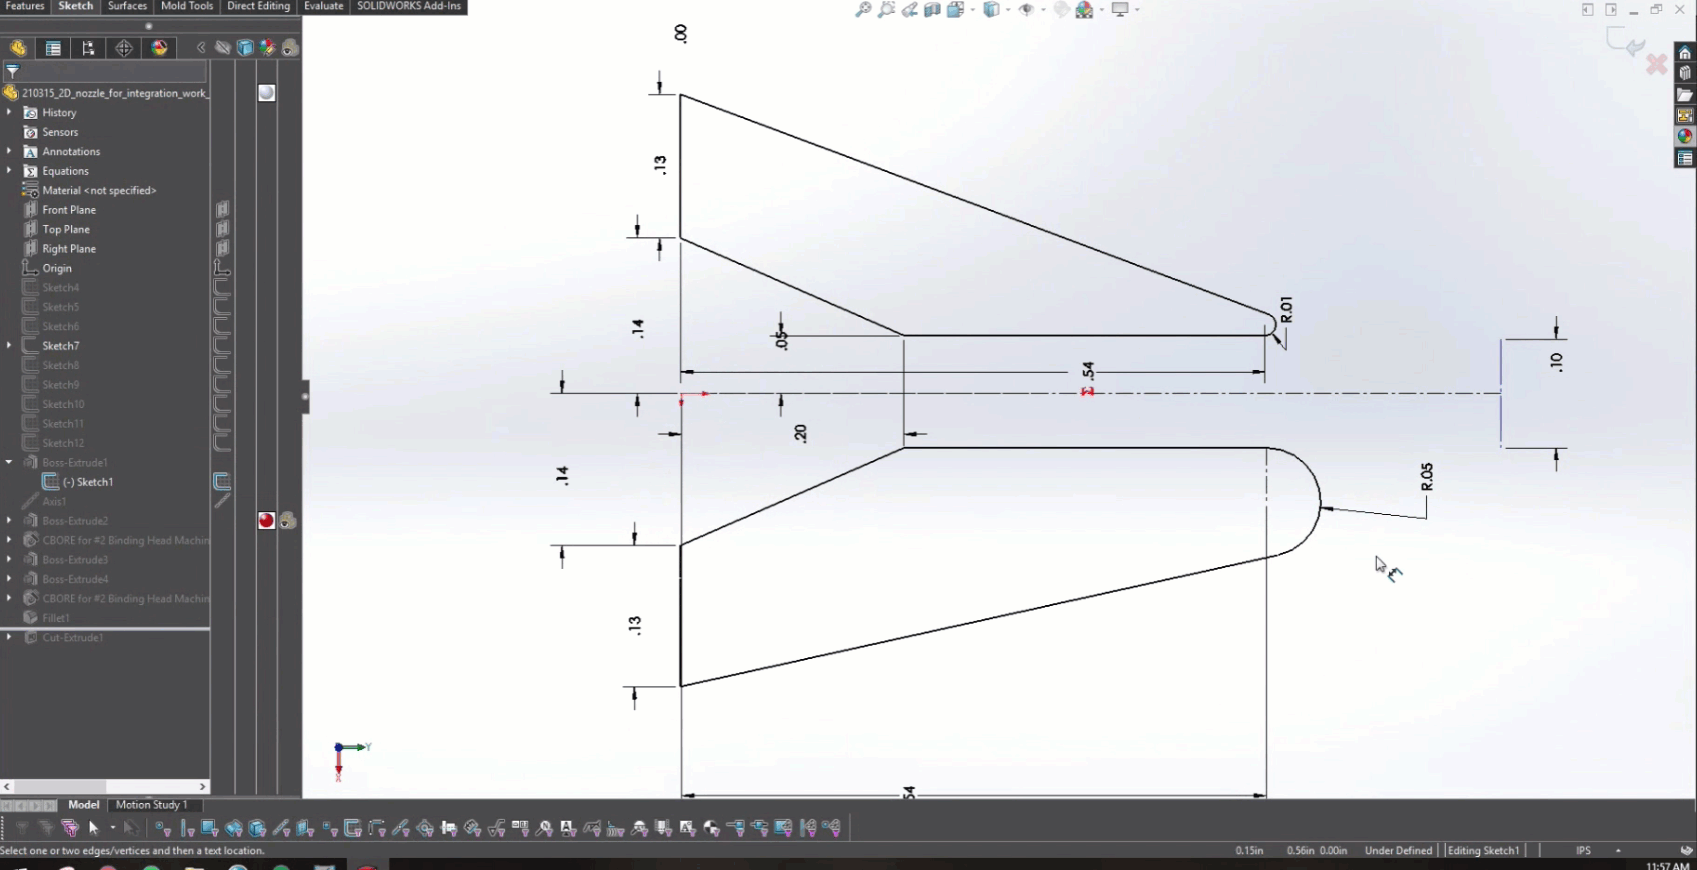 The animations show how changing the lower trailing edge radius provided the design with real-time feedback on what the resulting jet angle was.  